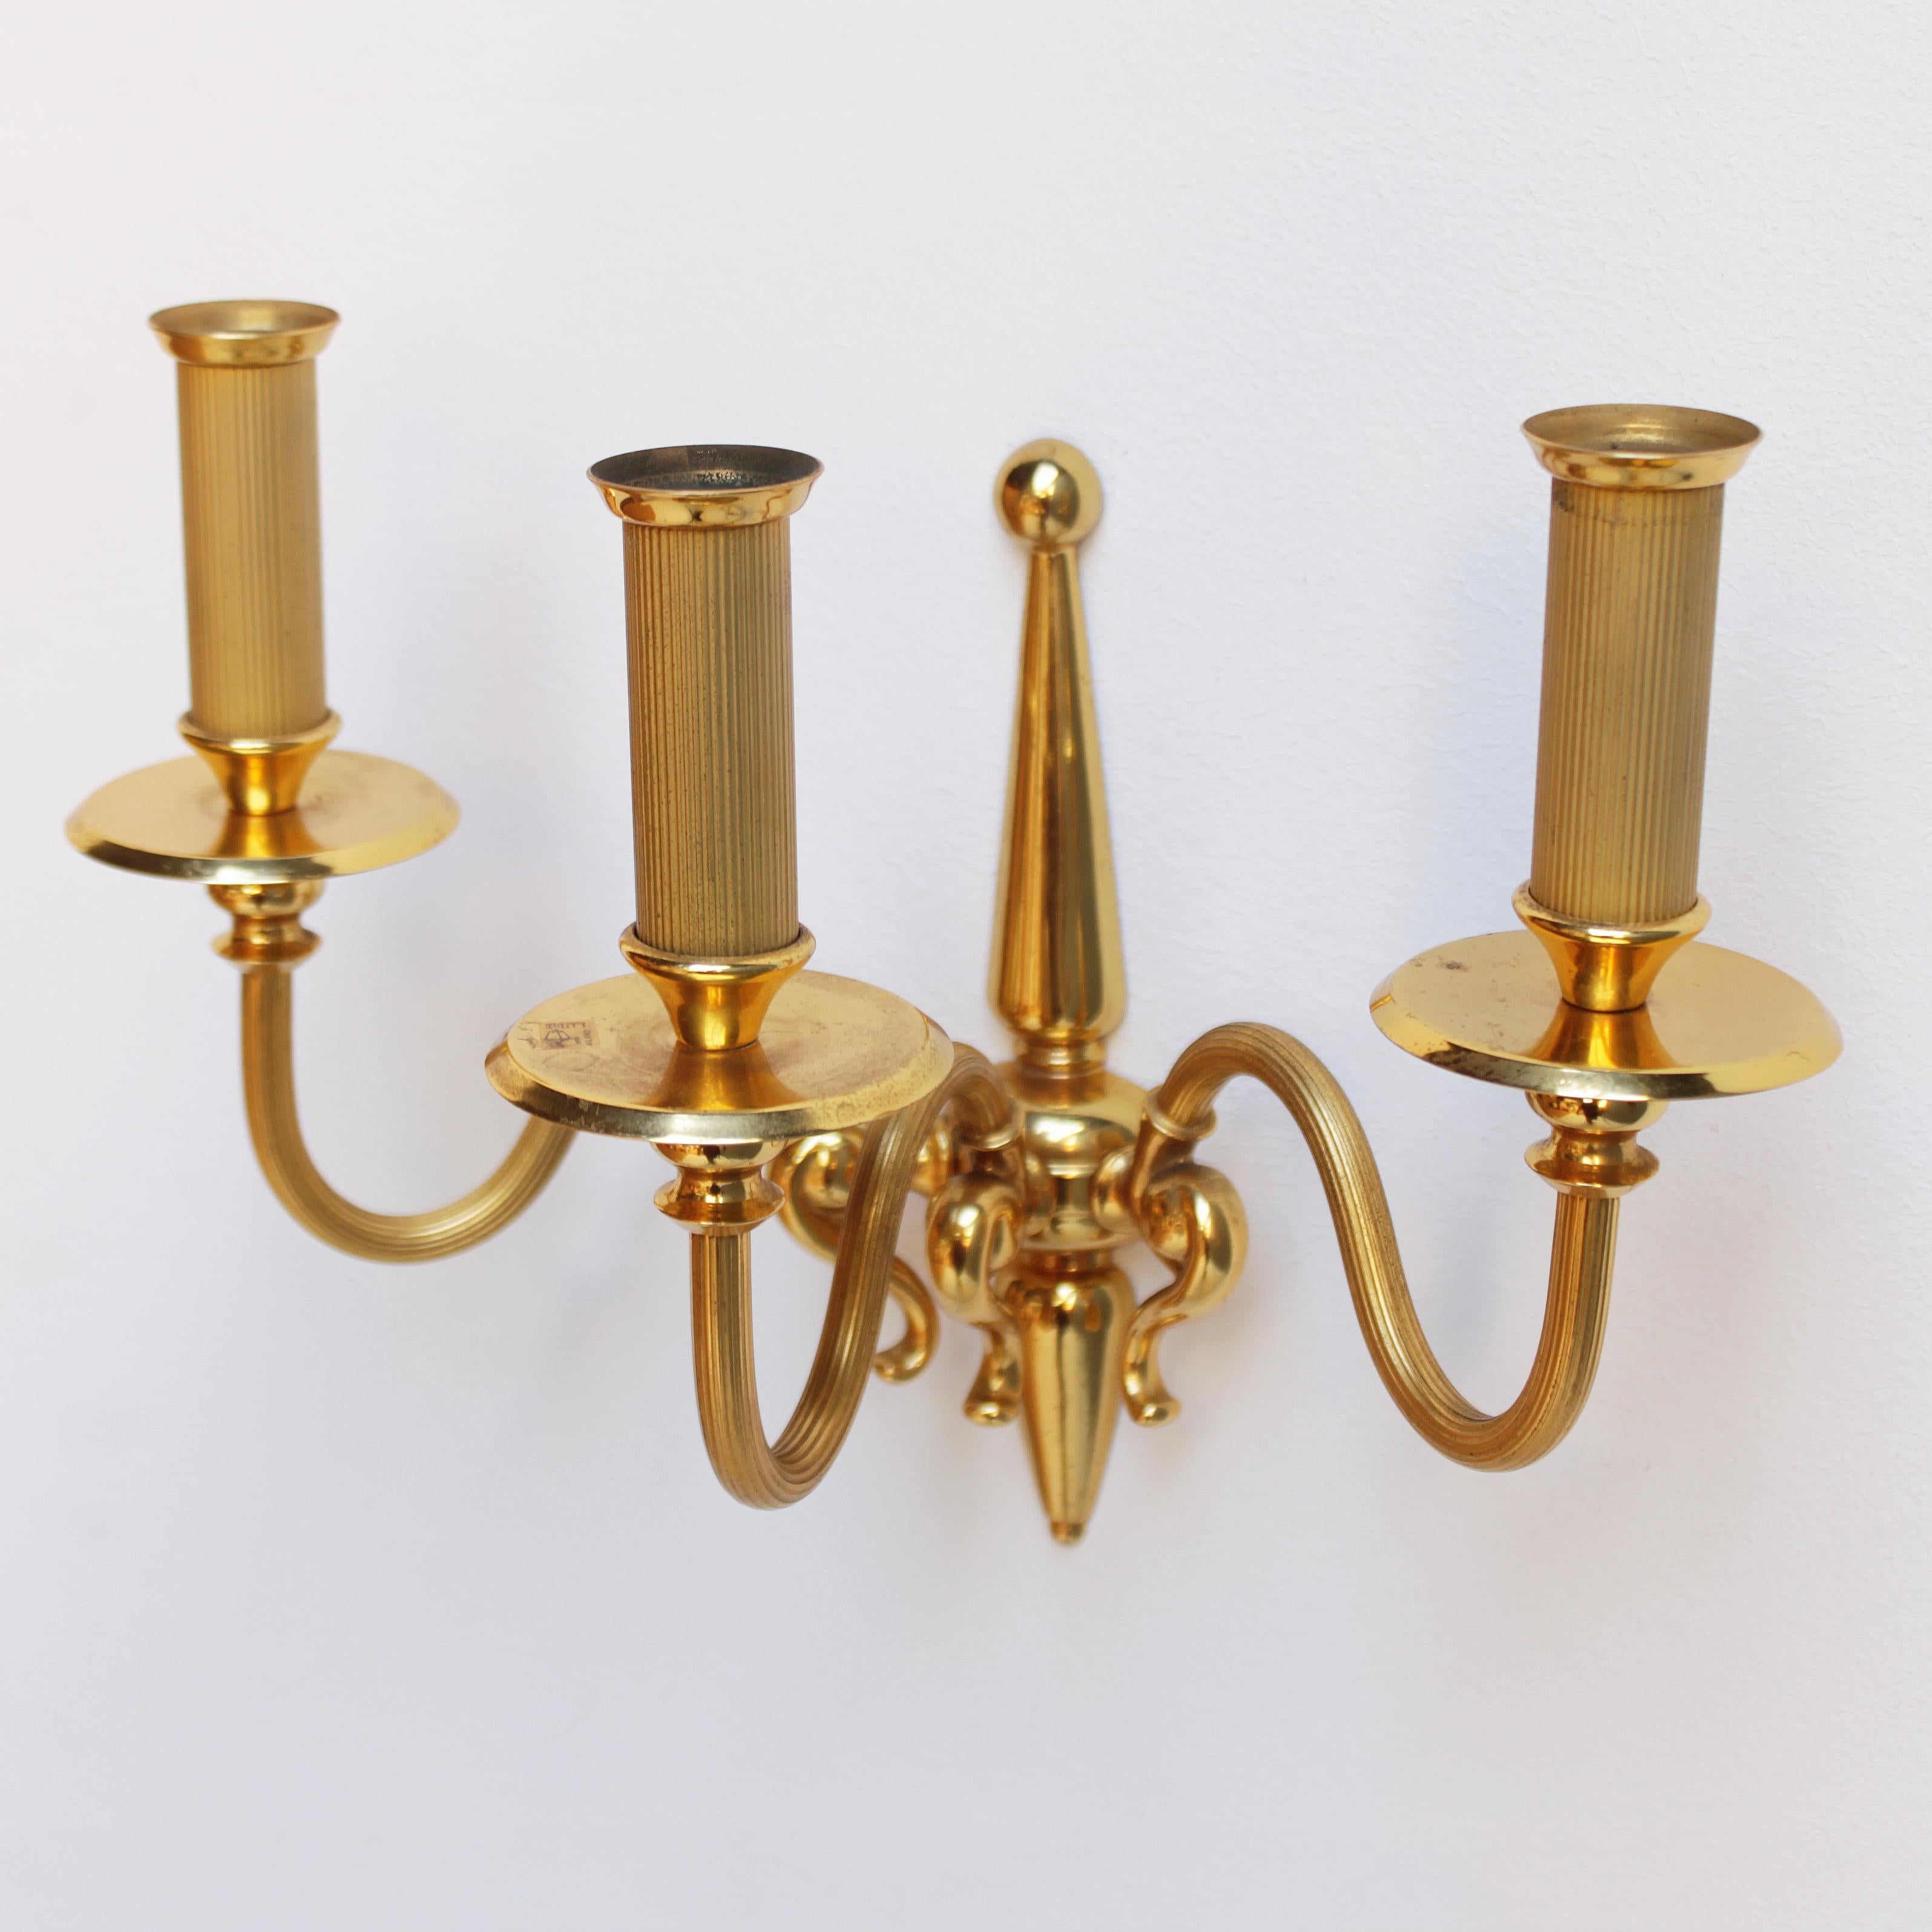 Two (2) Lumi Milano gold-plated wall lights, period 1960-69. 
Dimensions: height 10.24 in. (26 cm), width 13.0 in. (33 cm), depth 7.68 inches (19,5 cm).
The electricity is used but in a good condition, approved to European standards. Works in the